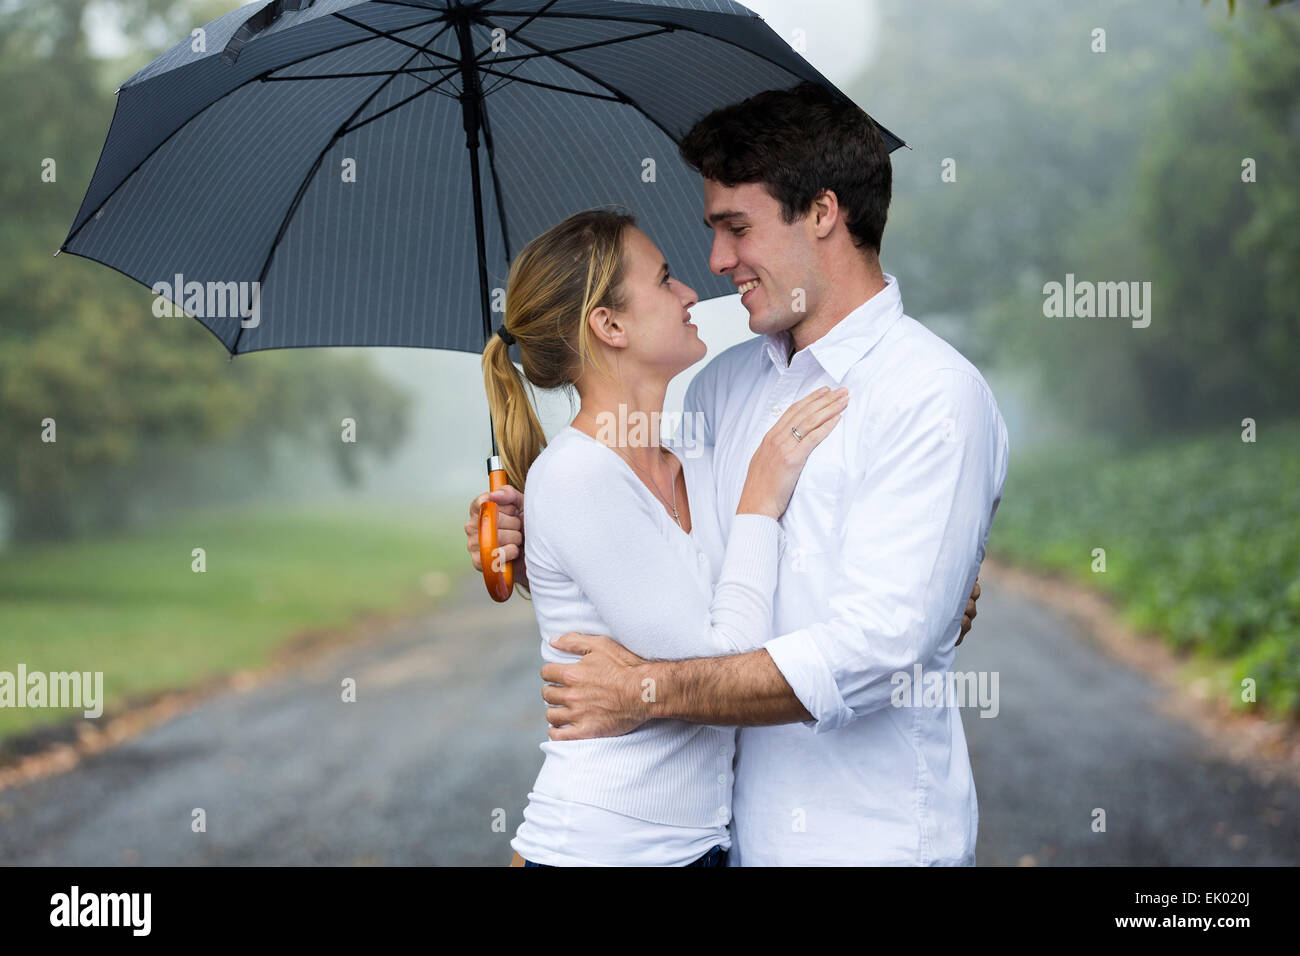 loving young couple with umbrella in the rain Stock Photo